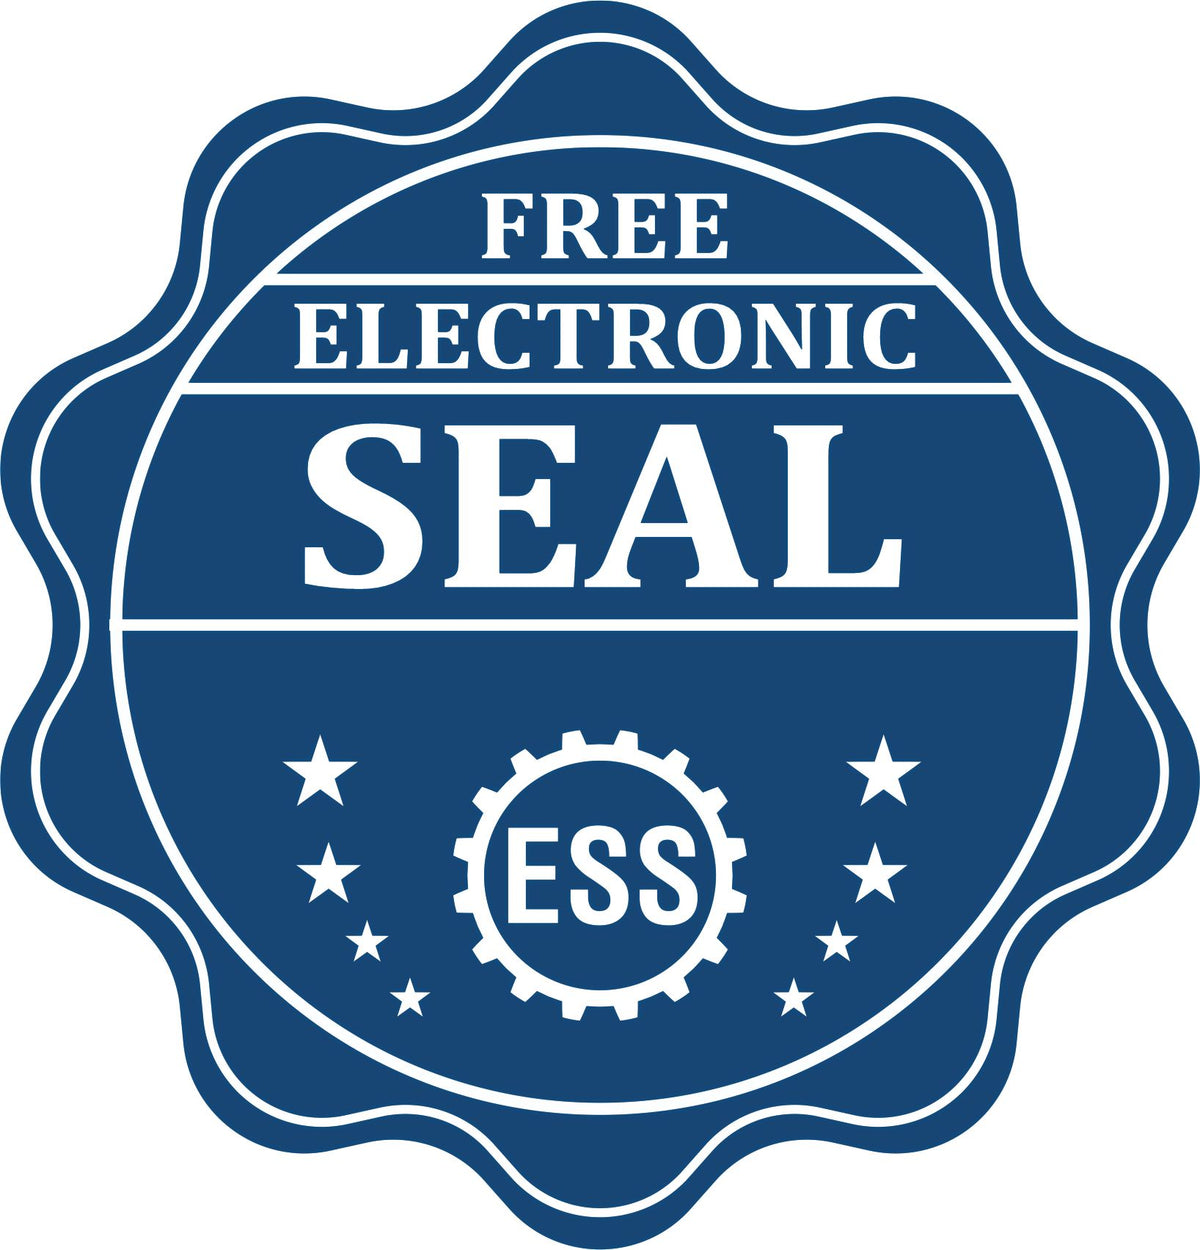 A badge showing a free electronic seal for the Heavy-Duty Arkansas Rectangular Notary Stamp with stars and the ESS gear on the emblem.